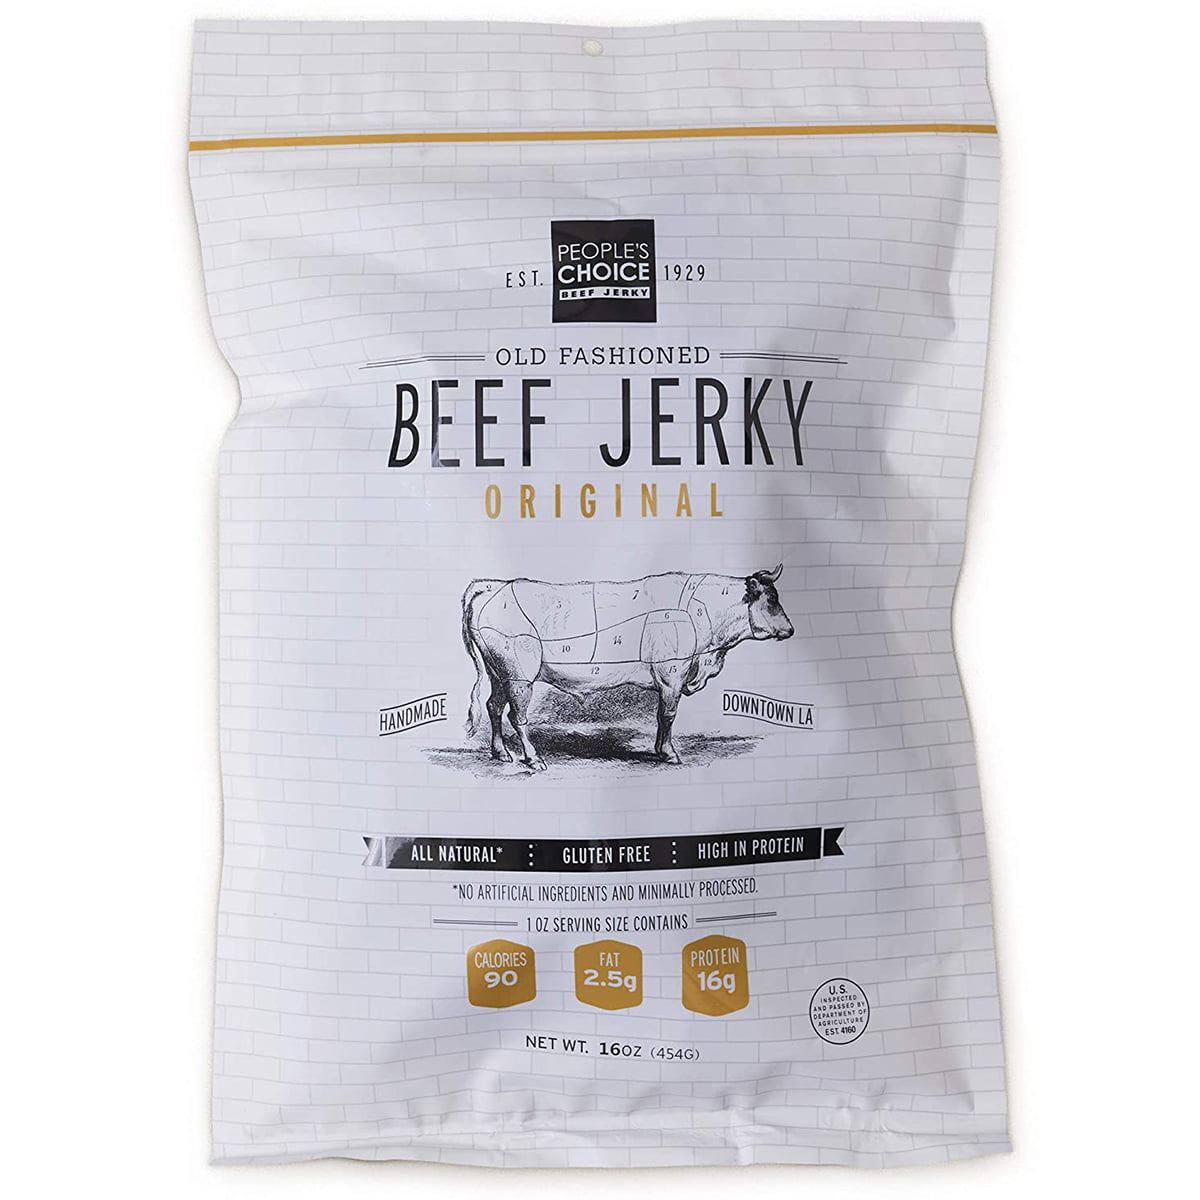 7.	People’s Choice Old Fashioned Beef Jerky Packaging